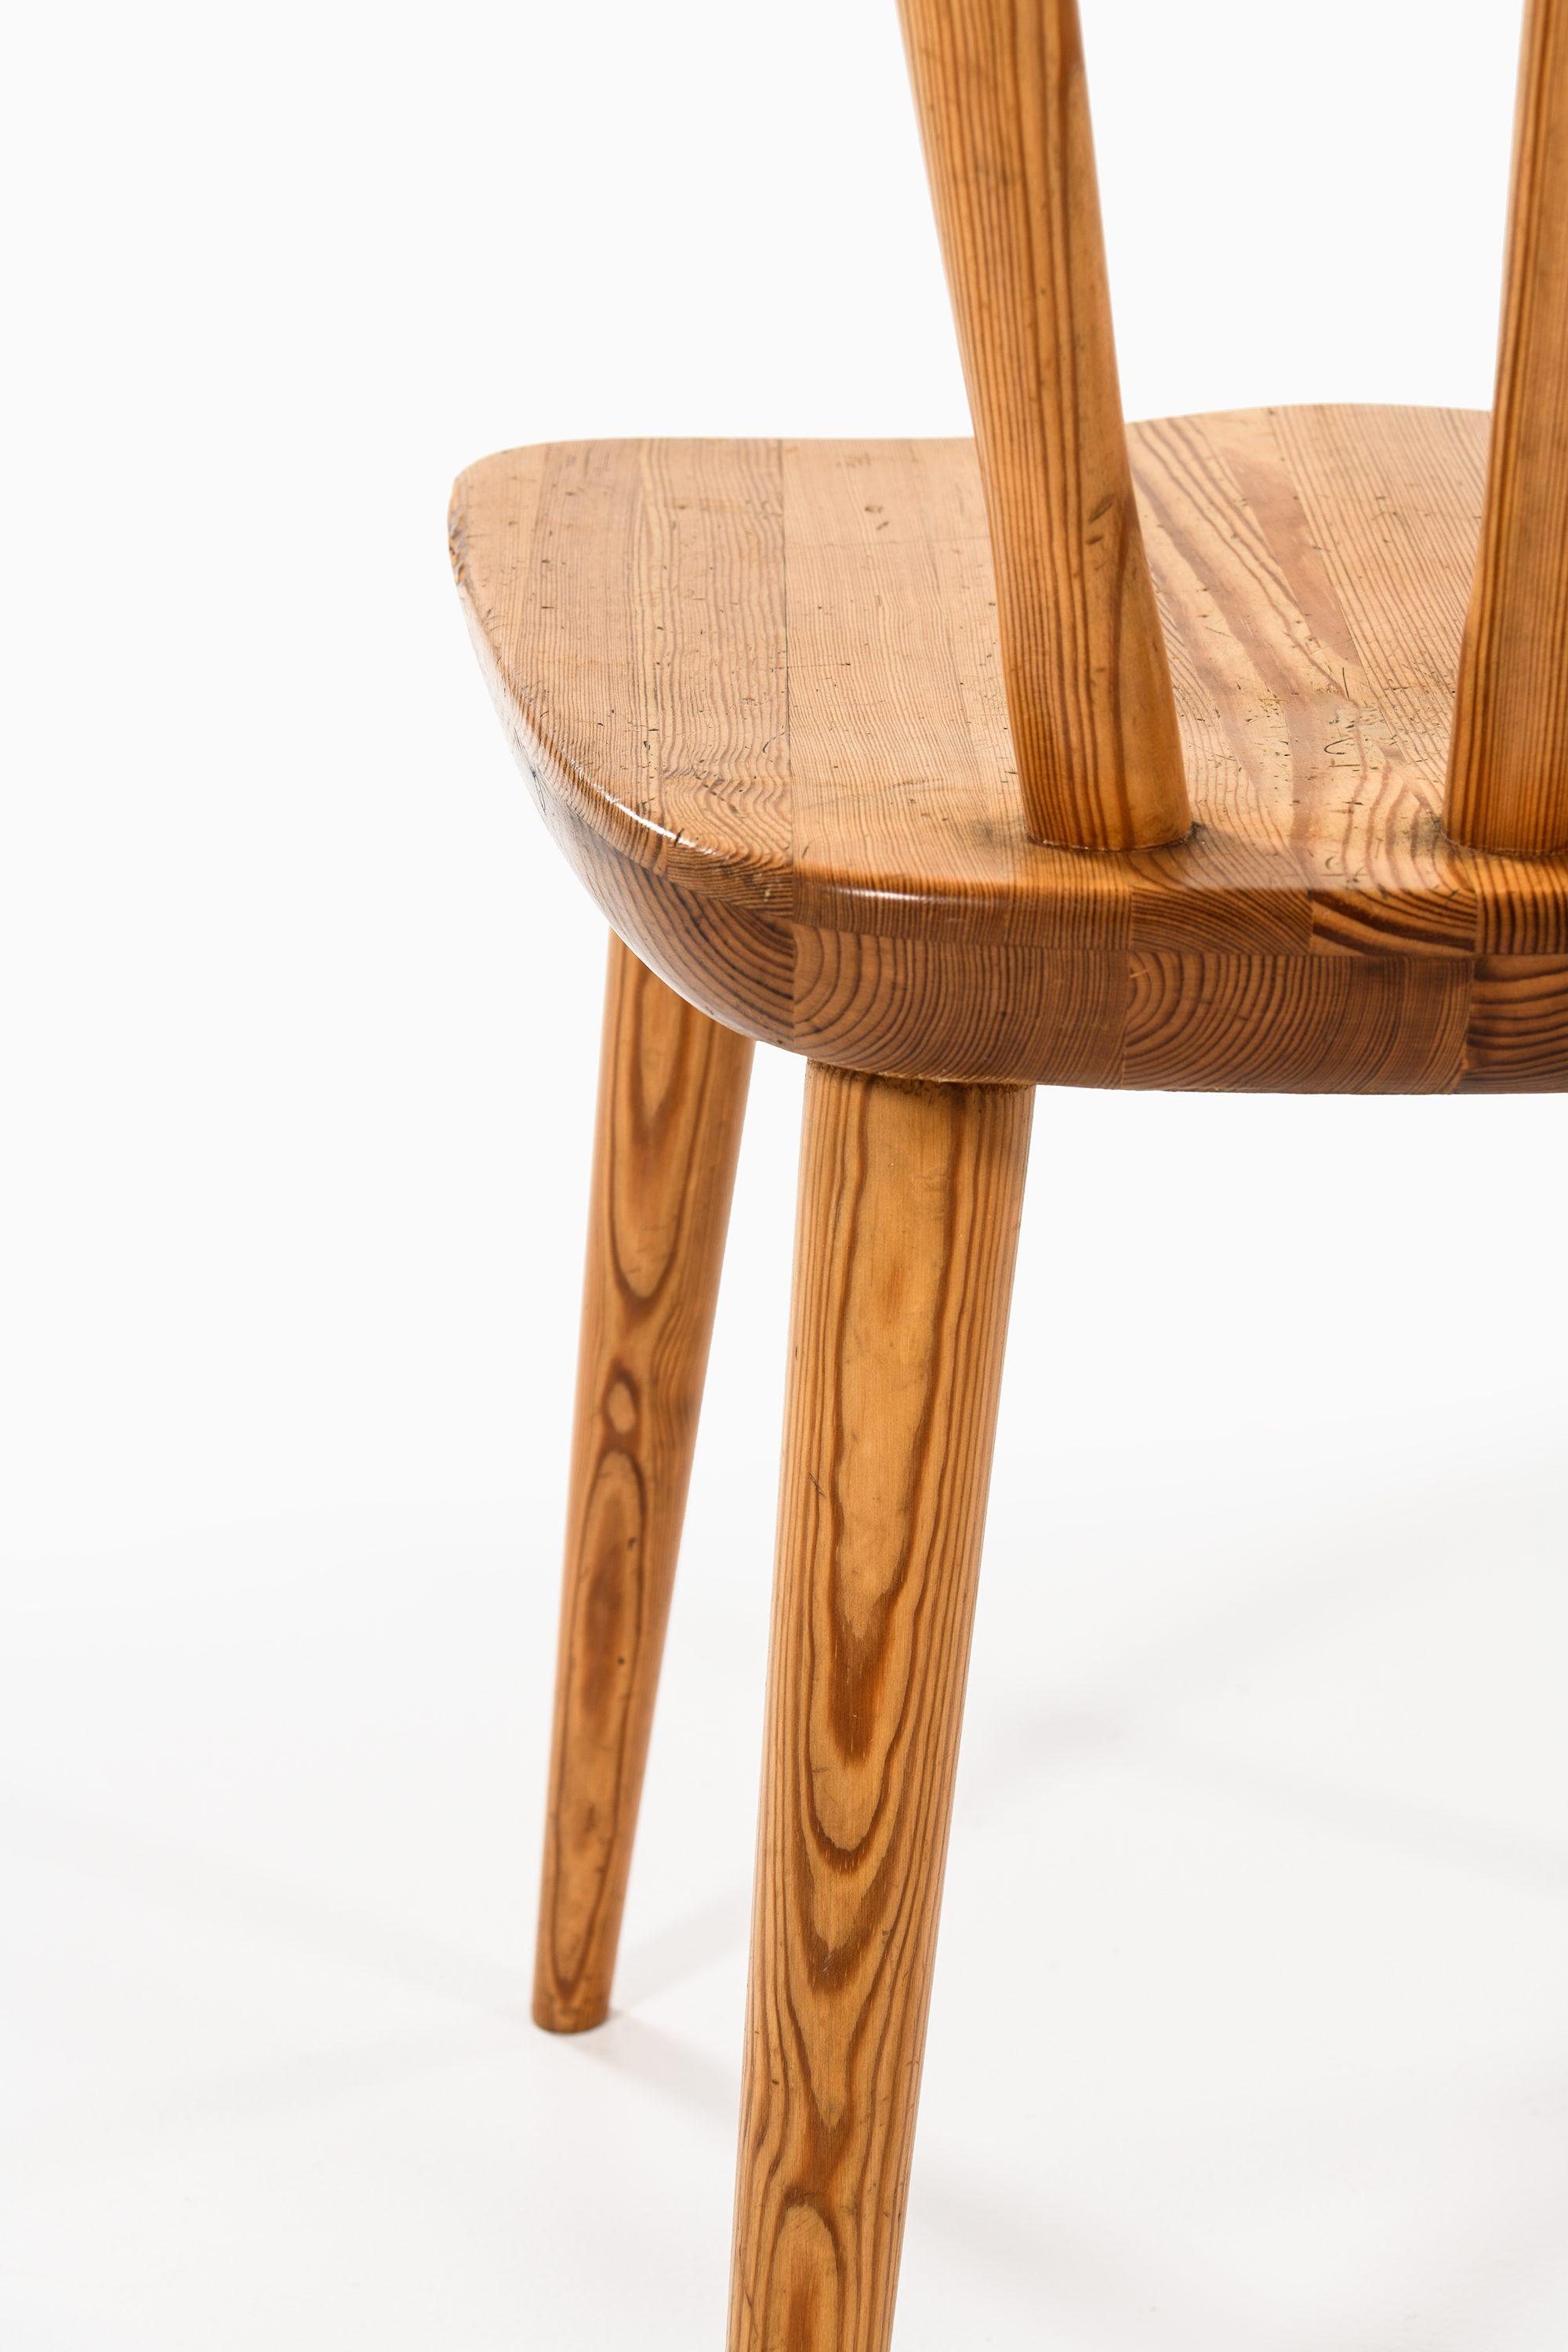 20th Century Set of 8 Dining Chairs in Solid Pine by Göran Malmvall, 1940's For Sale